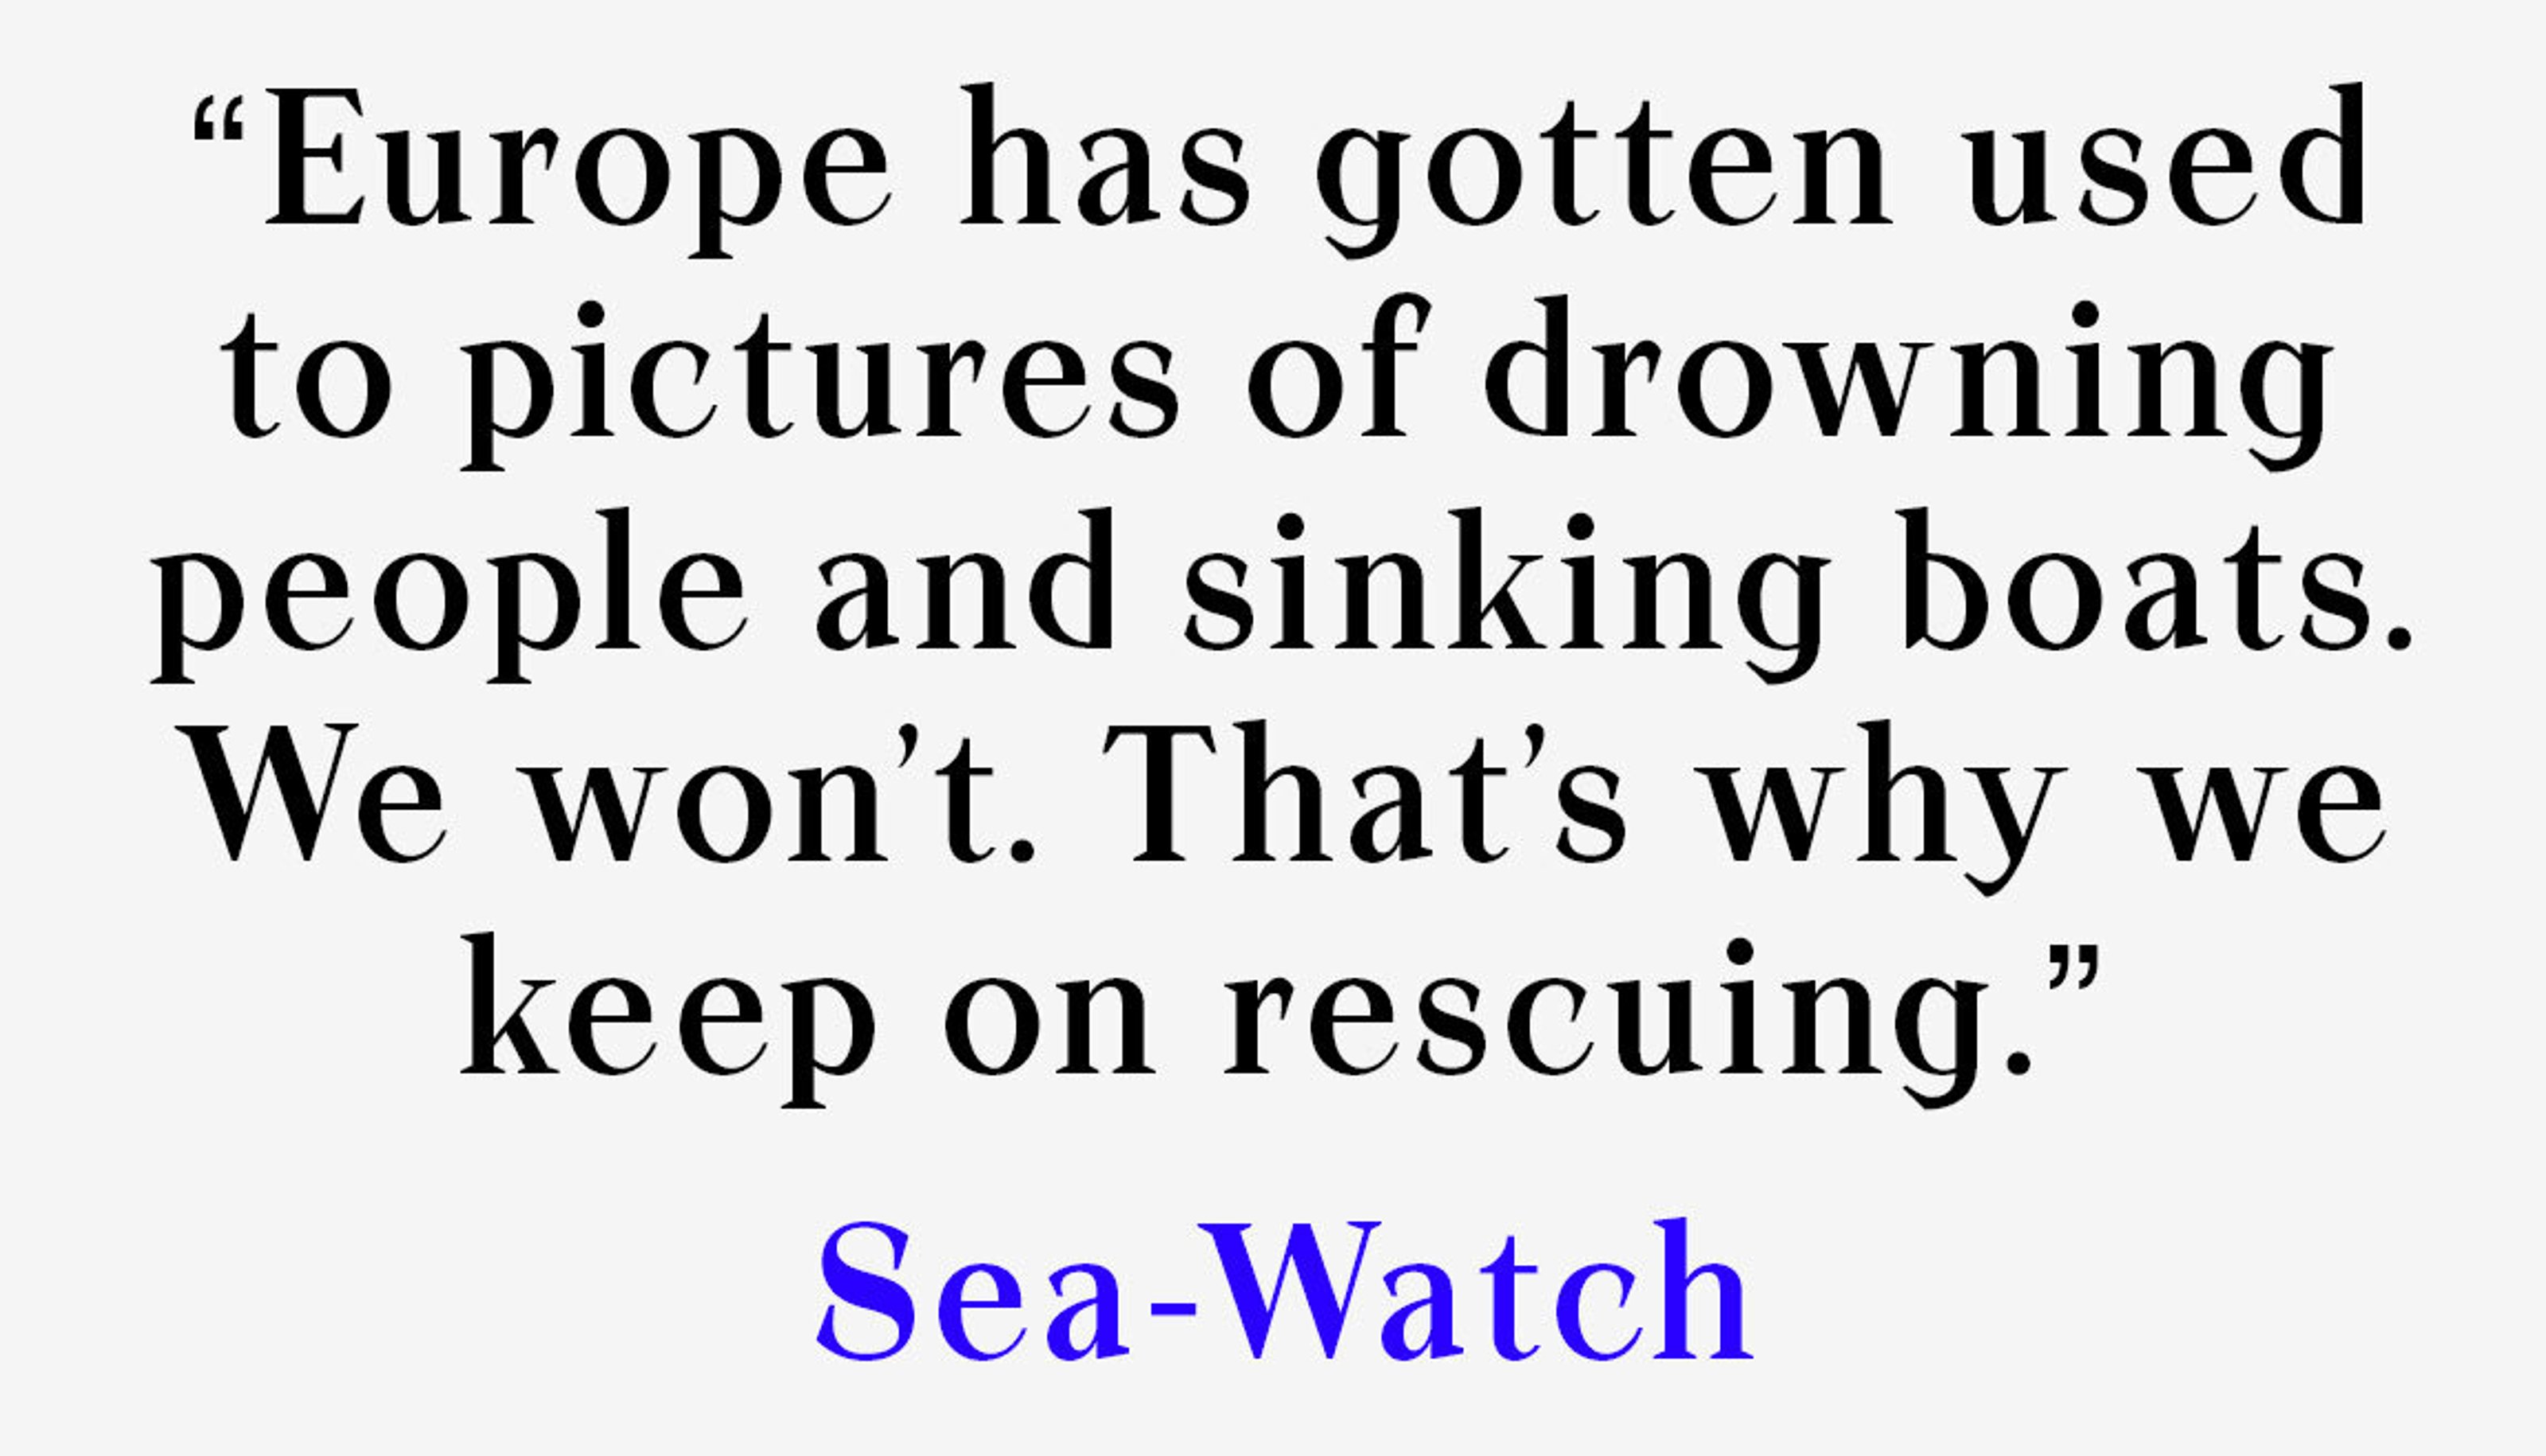 Europe has gotten used to pictures of drowning people and sinking boats. We won’t. That’s why we keep on rescuing.